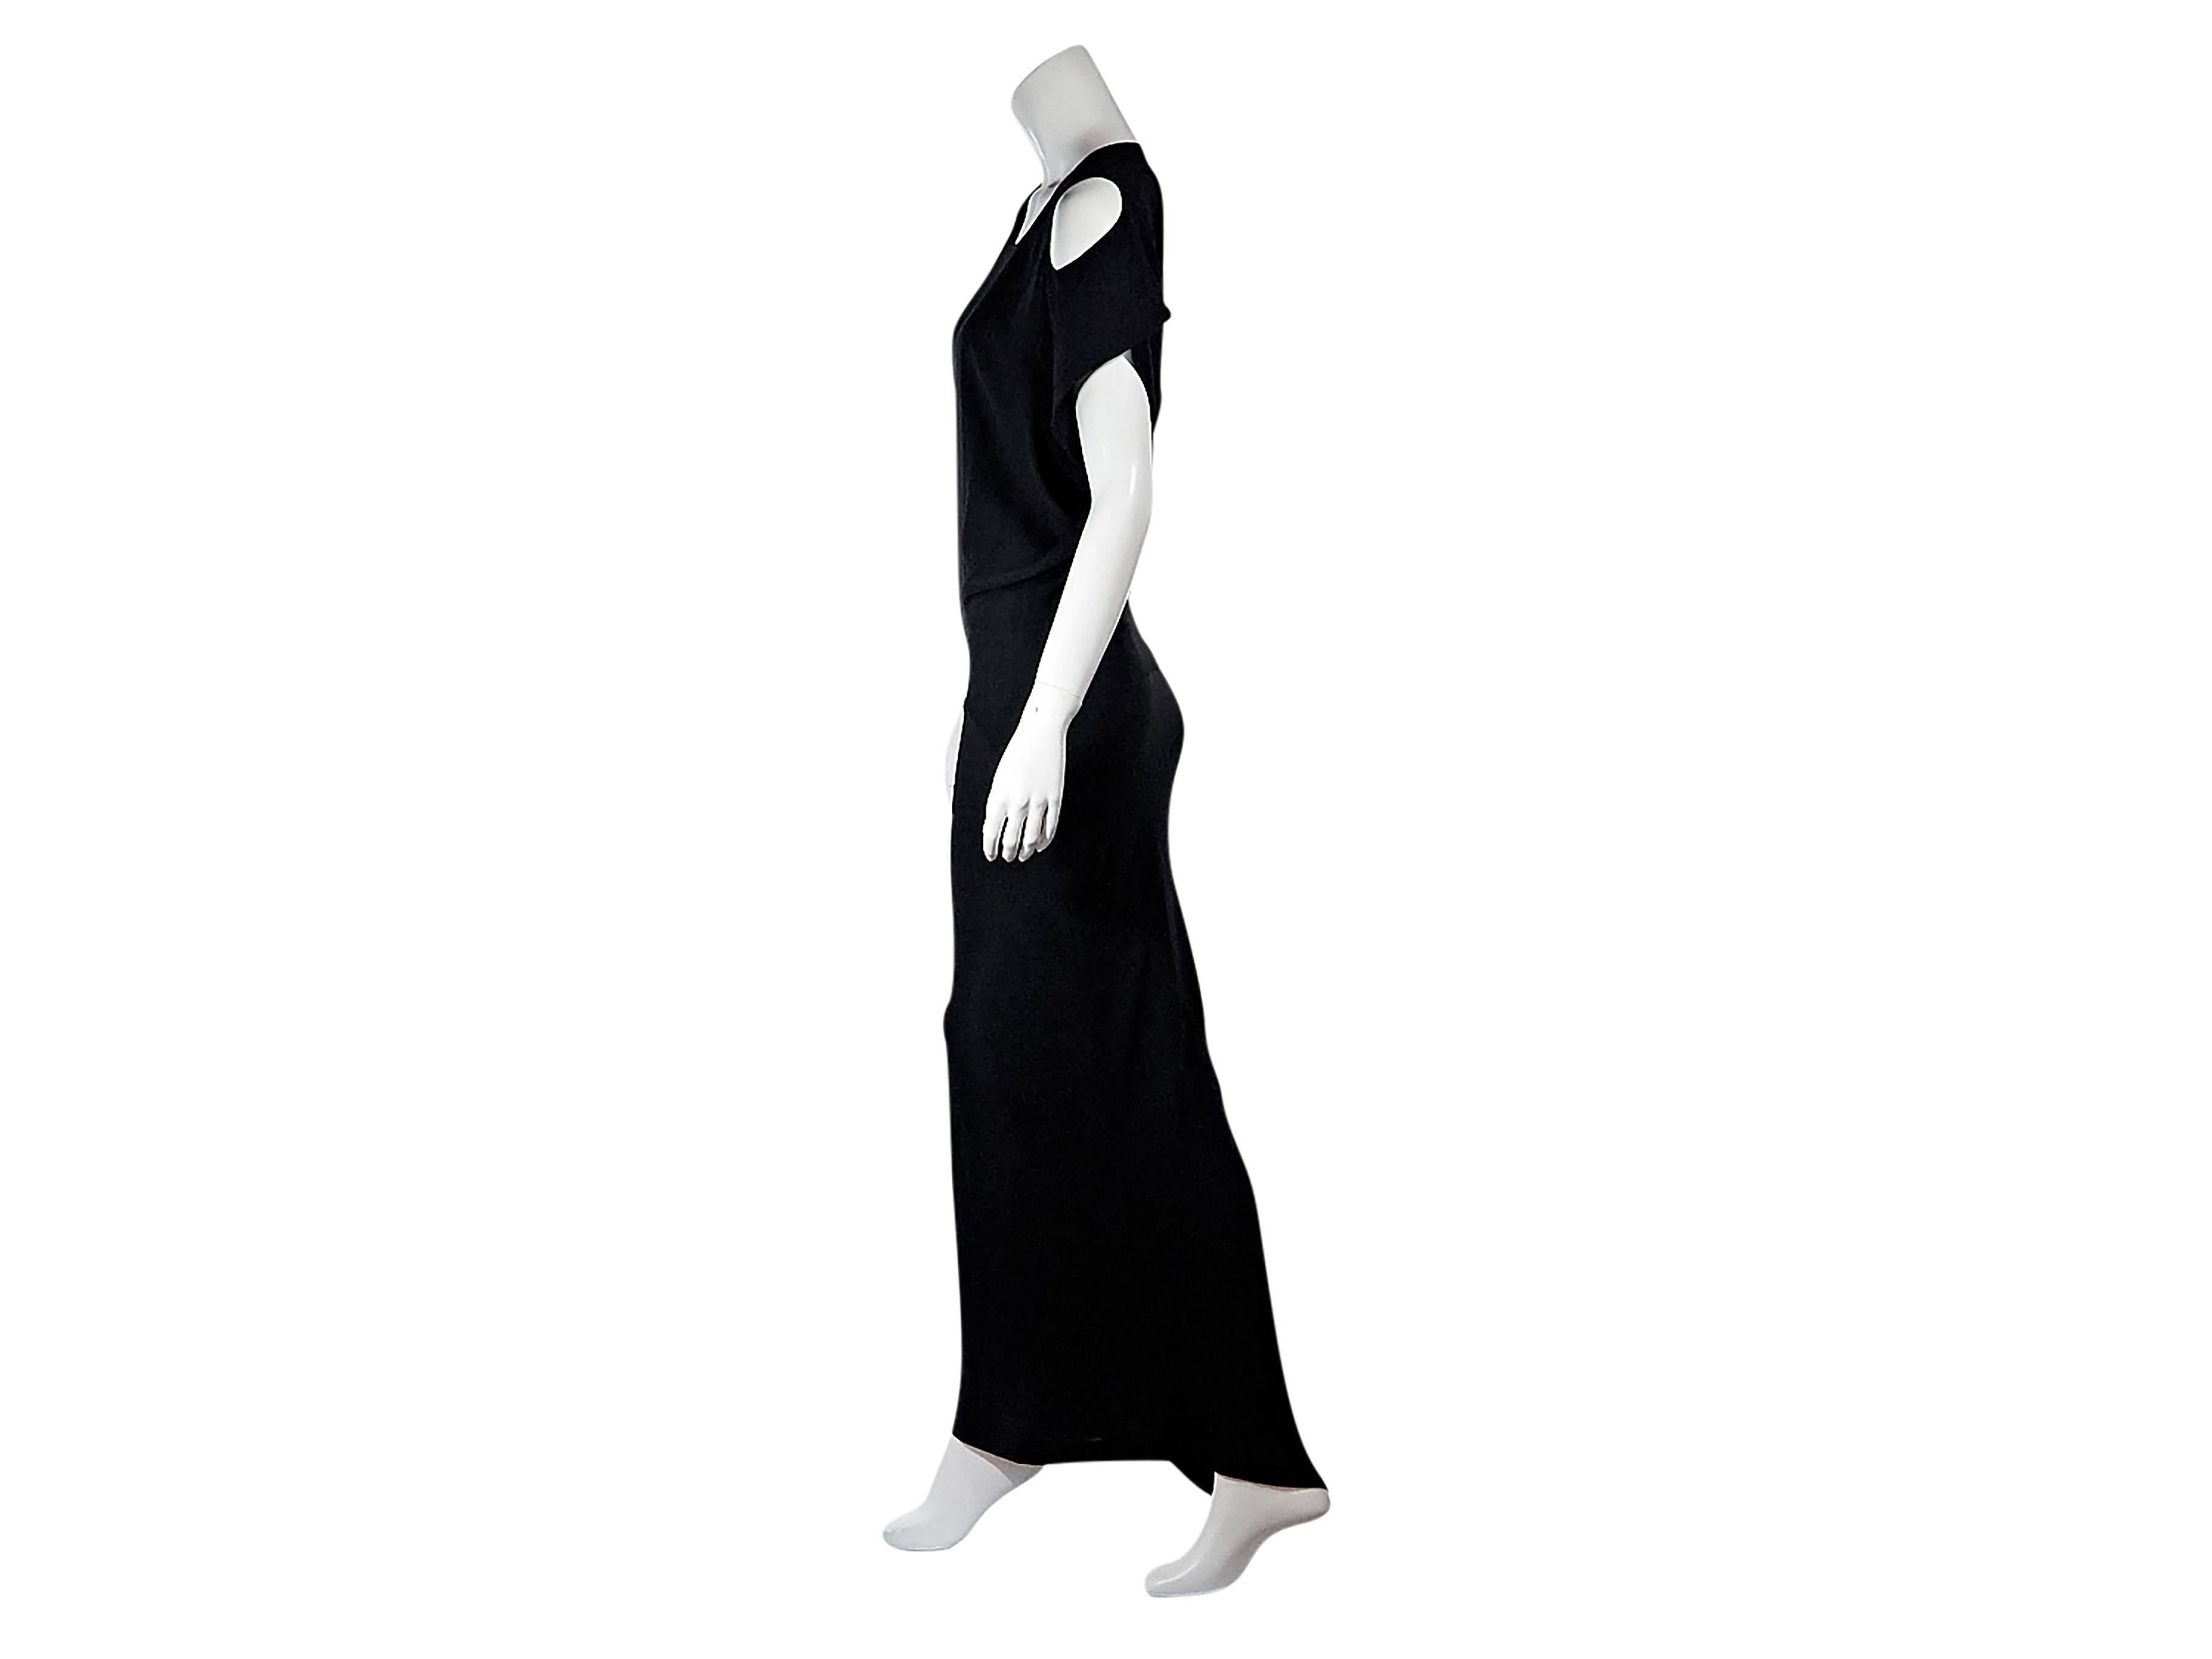 Product details:  Black stretch silk maxi dress by Zero + Maria Cornejo.  Scoopneck.  Short dolman sleeves.  Cold shoulder cutouts.  Pullover style. Size 4.  
Condition: Pre-owned. Very good.


Est. Retail $ 798.00